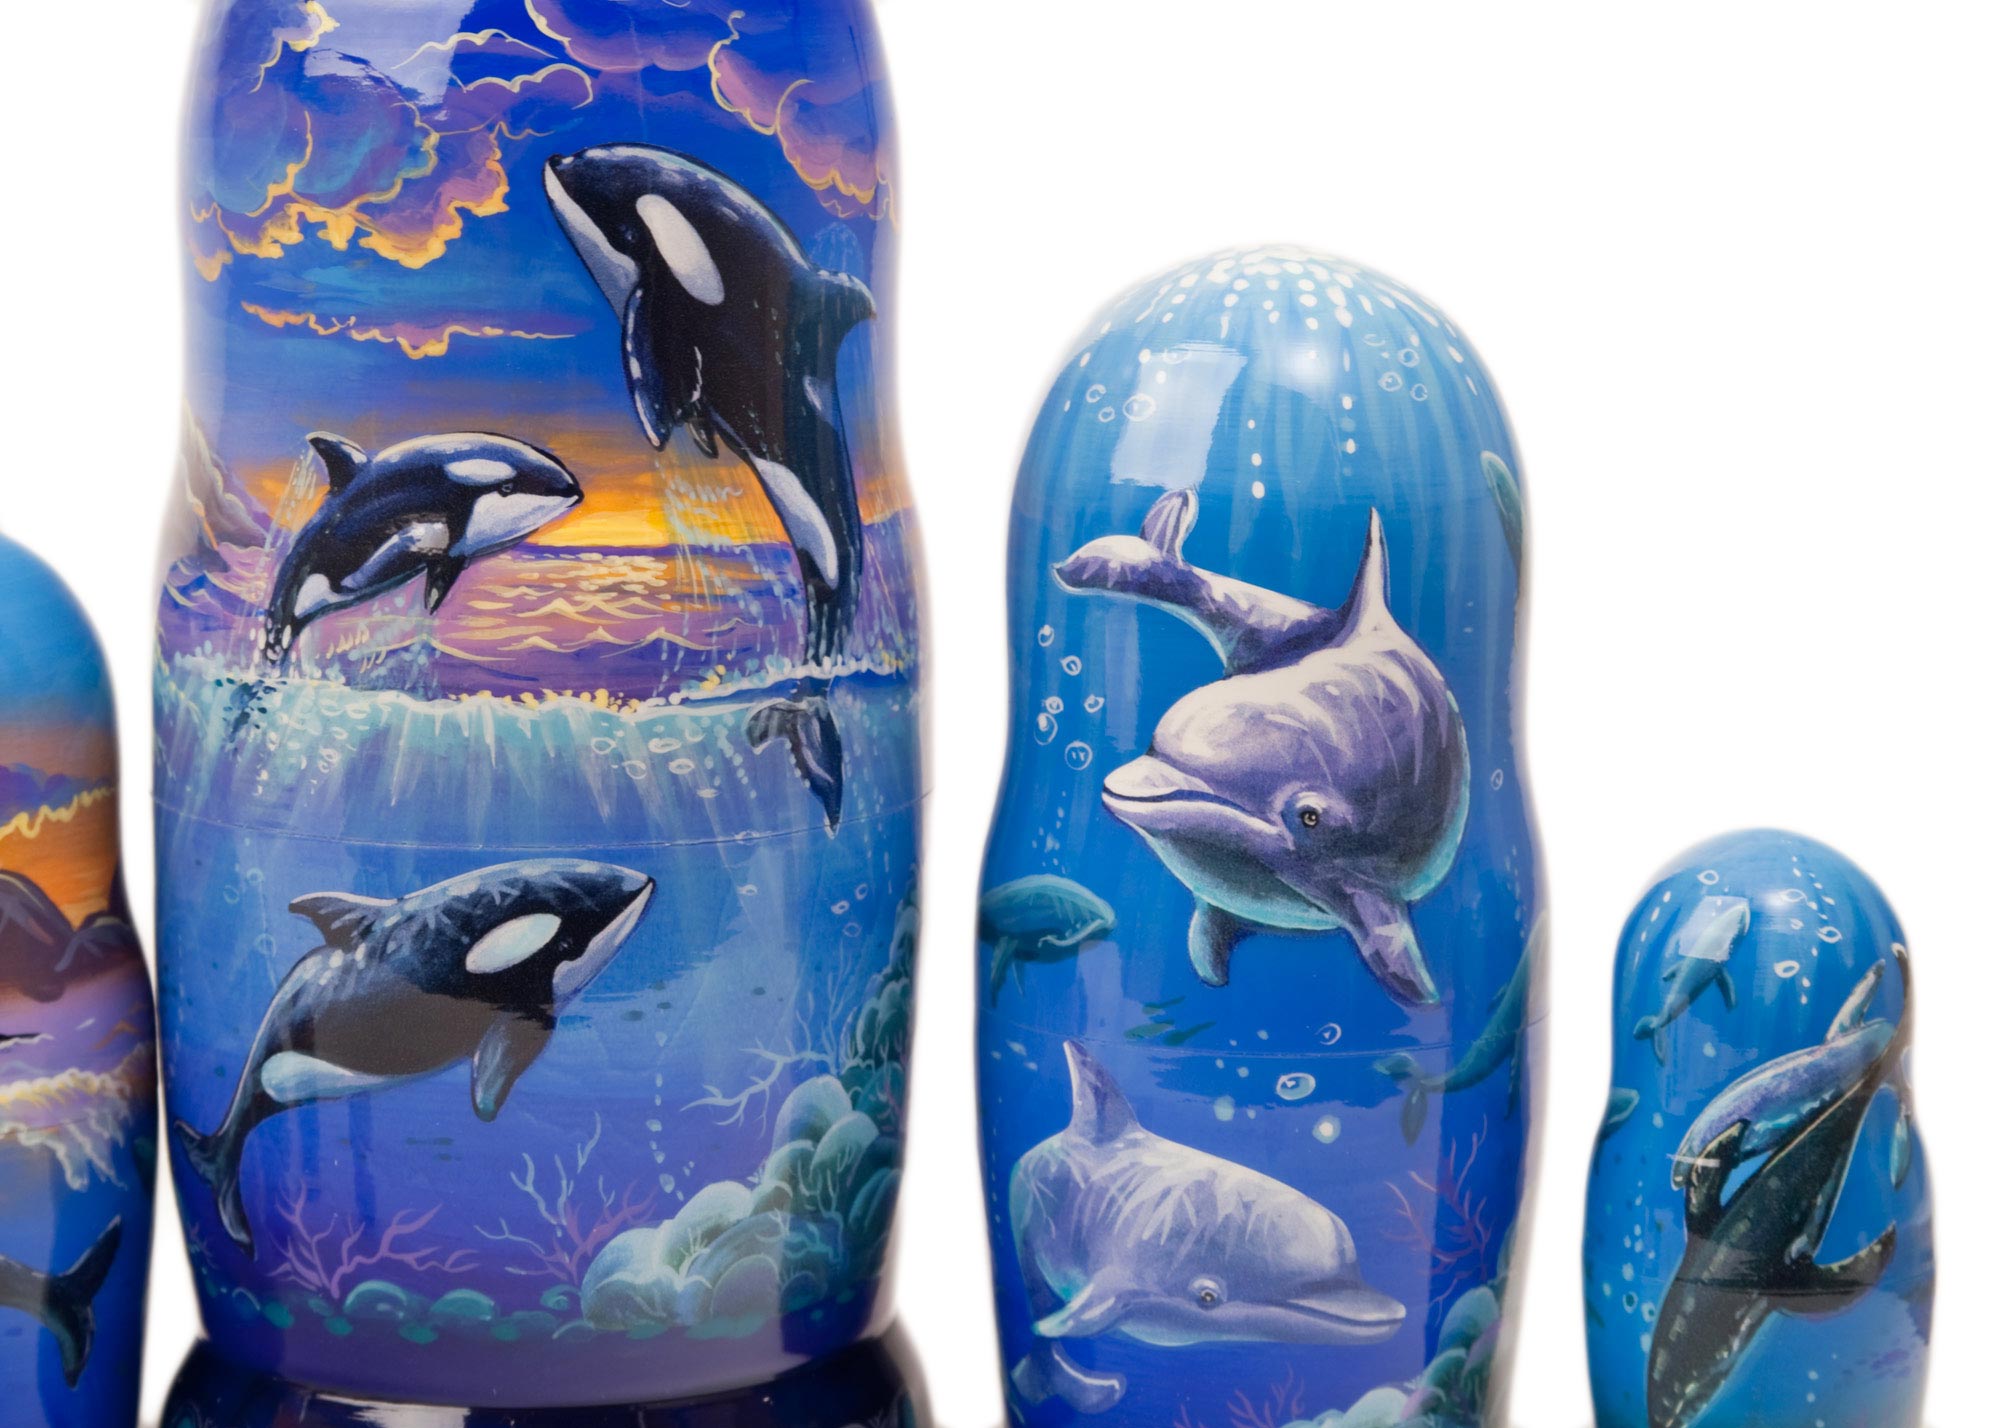 Buy Whale Watching Nesting Doll 7pc/8" at GoldenCockerel.com